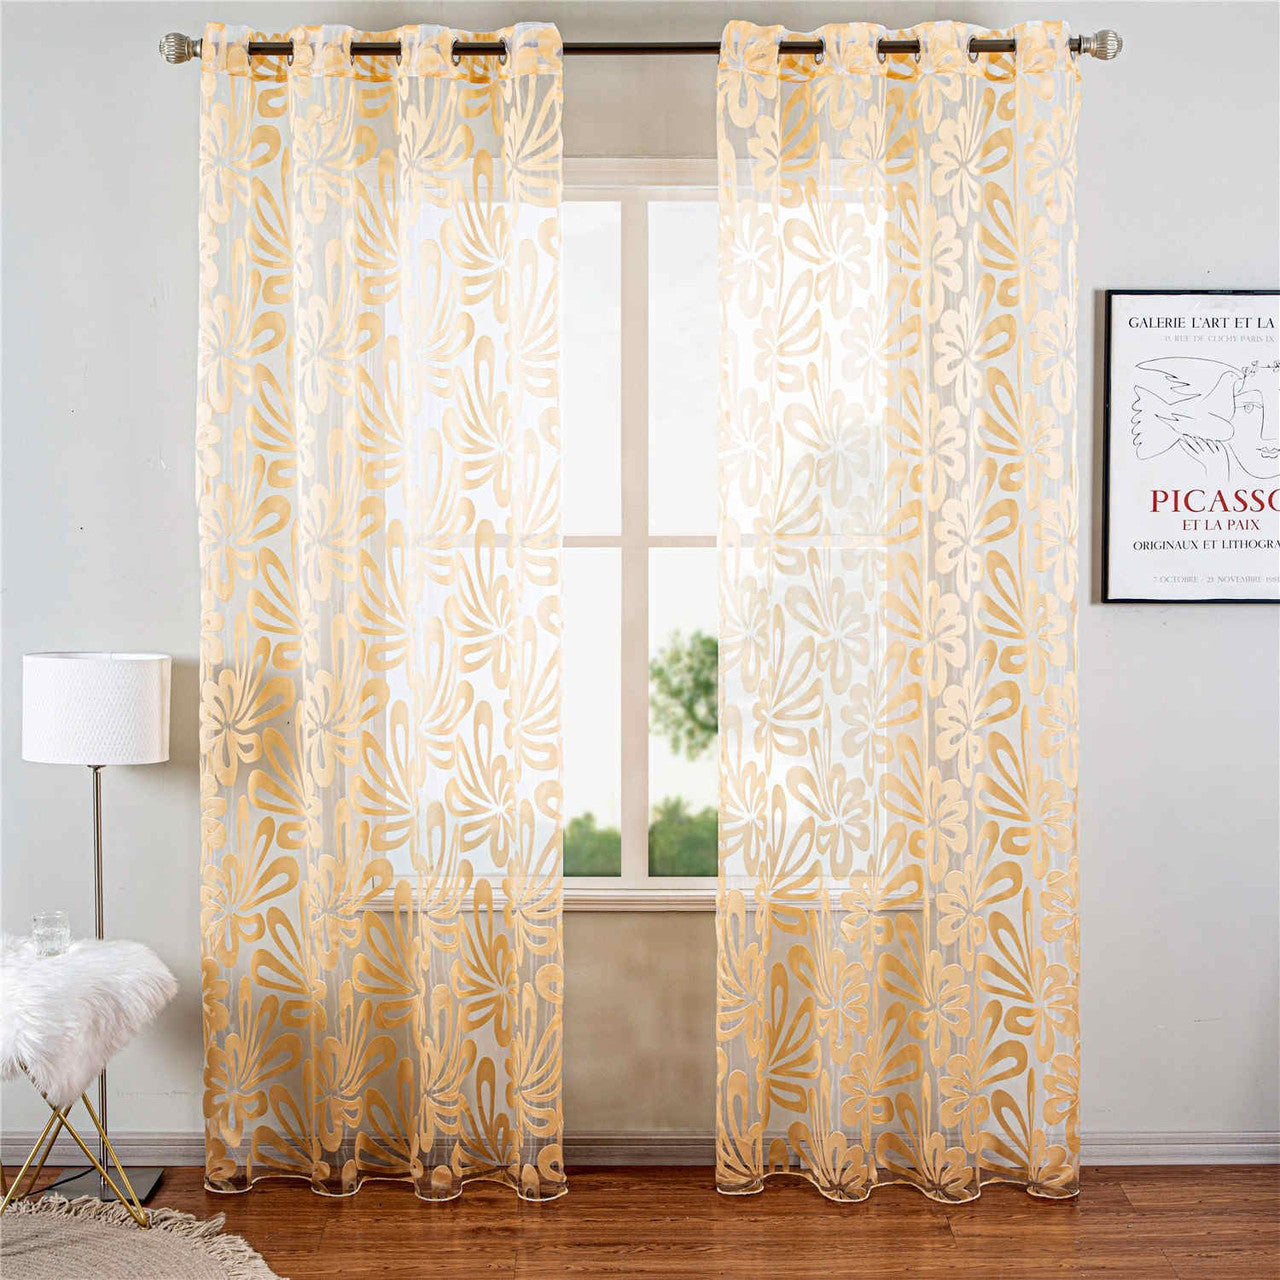 Brussels Sheer Curtain Panel by Dolce Mela